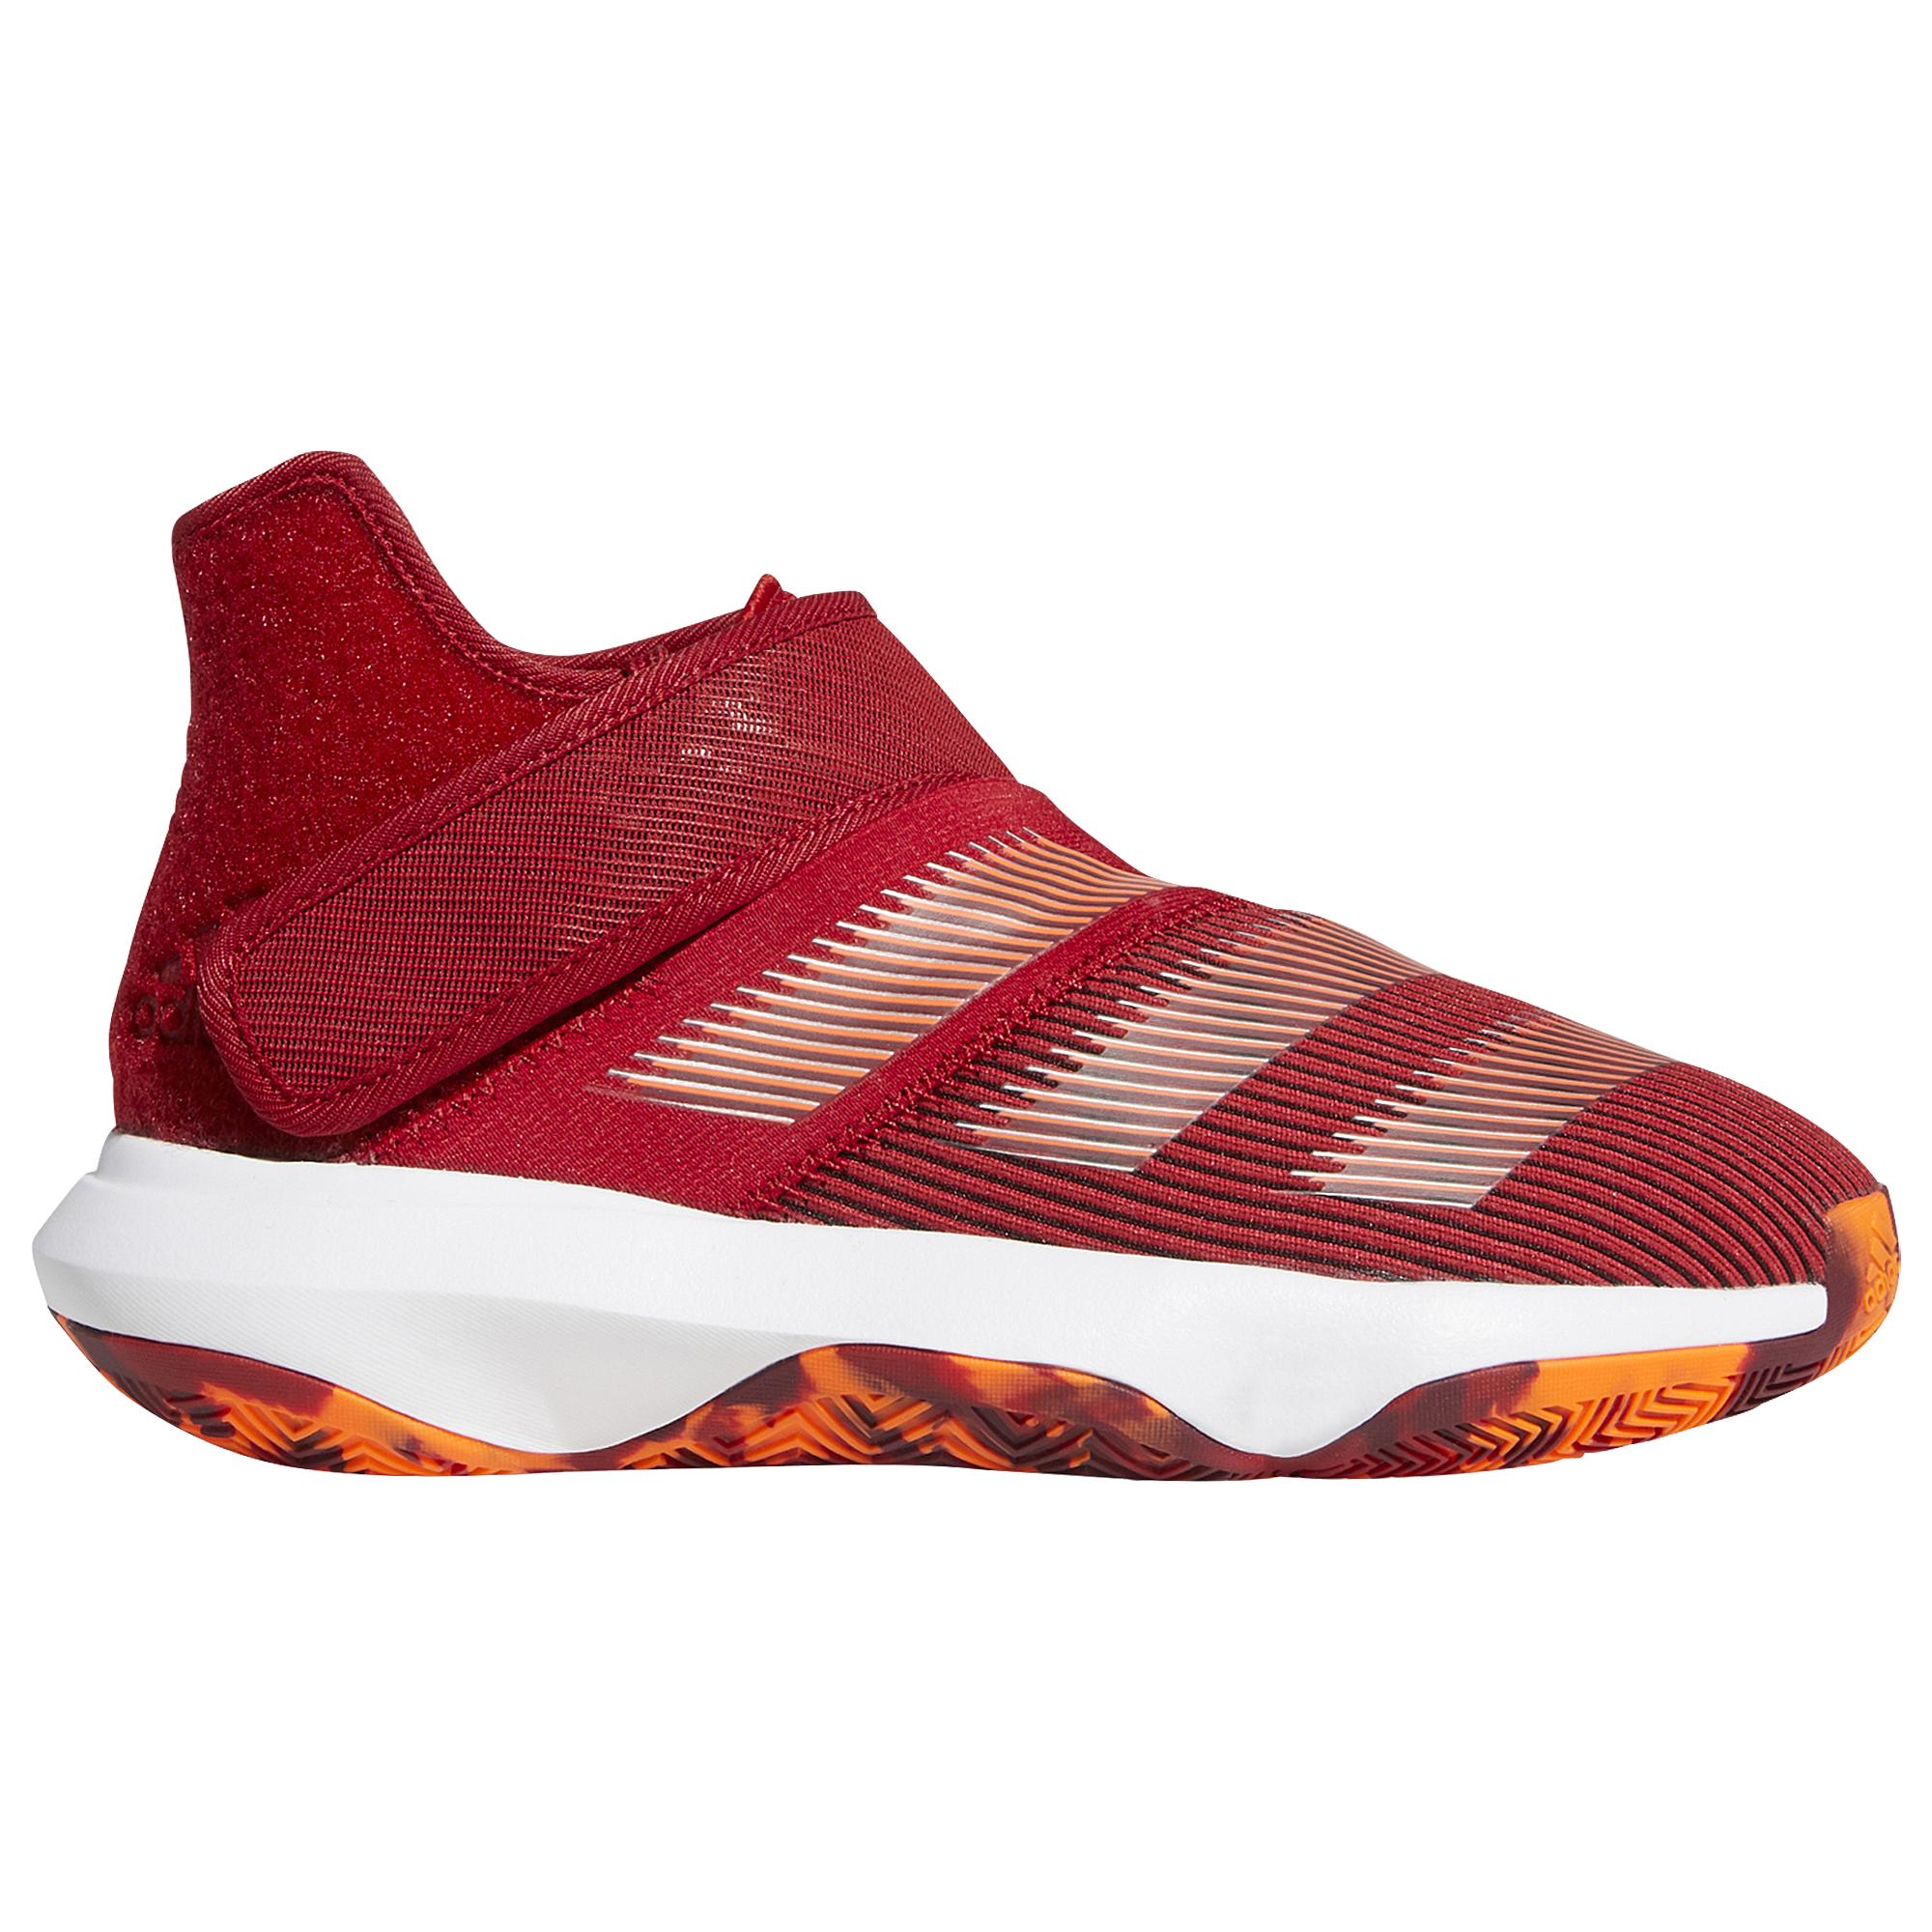 adidas Rubber Harden B/e 3 Basketball Shoe in Red for Men - Save 48% - Lyst